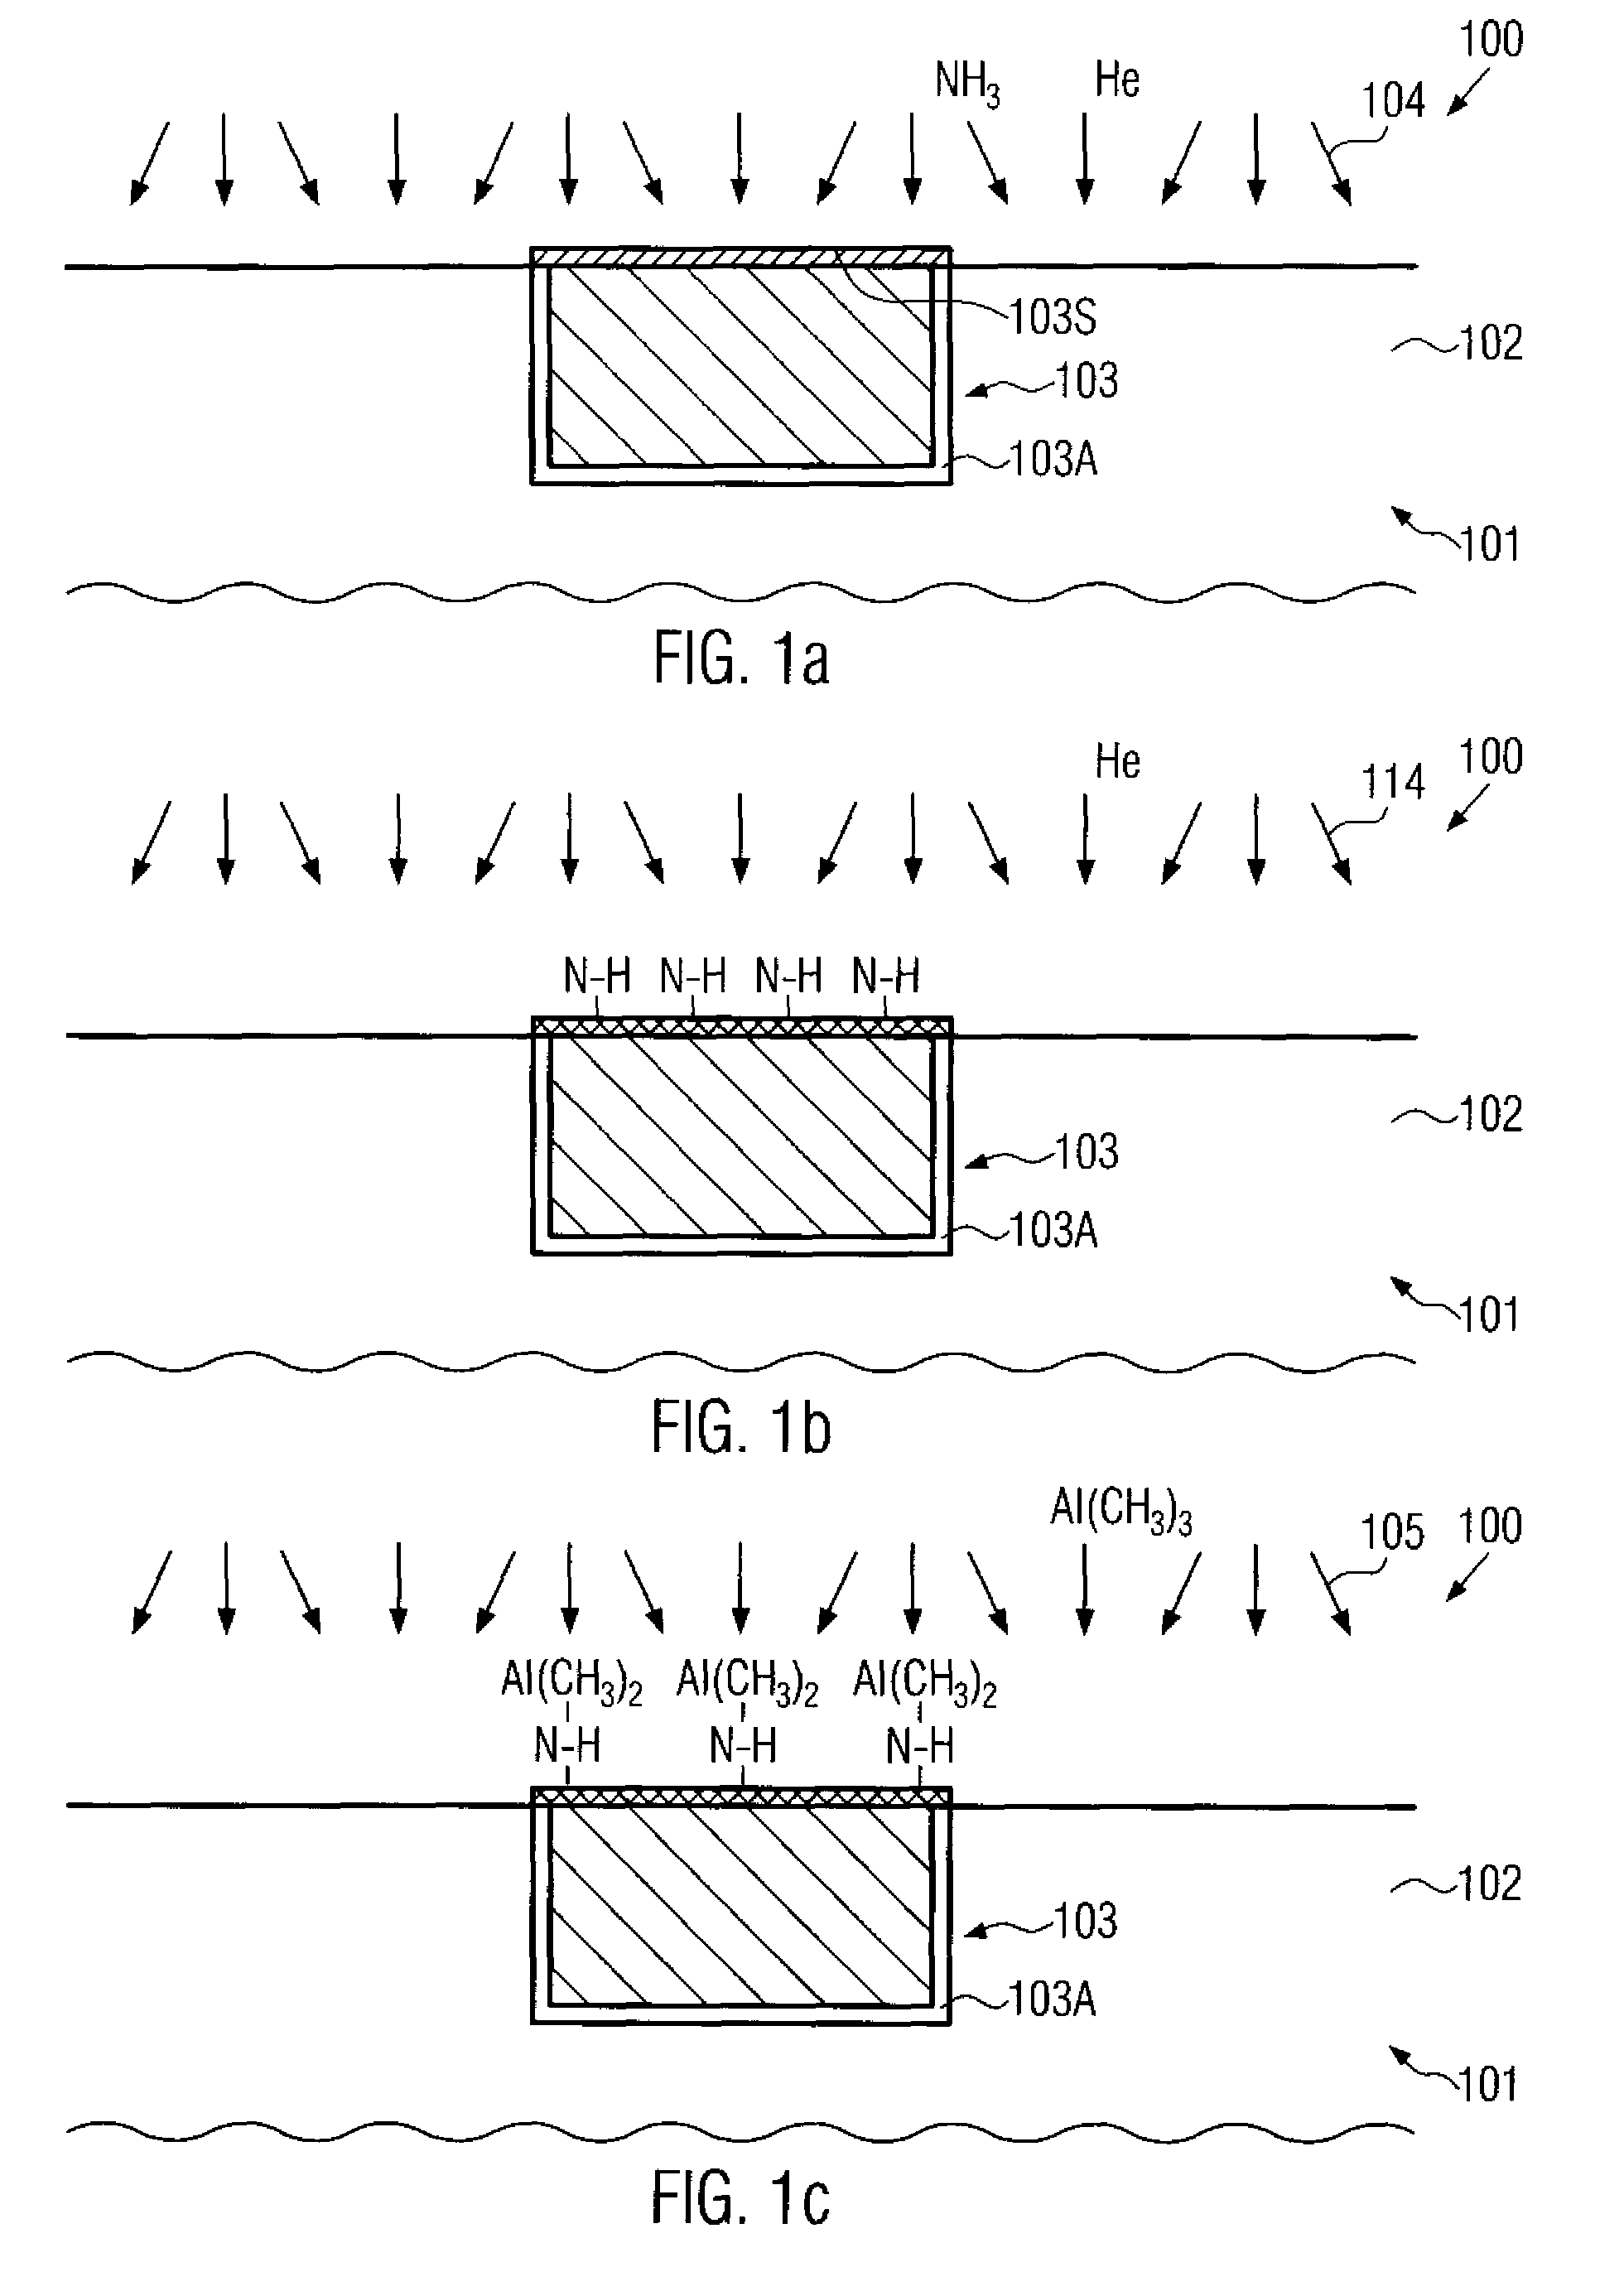 Method of manufracturing increasing reliability of copper-based metallization structures in a microstructure device by using aluminum nitride